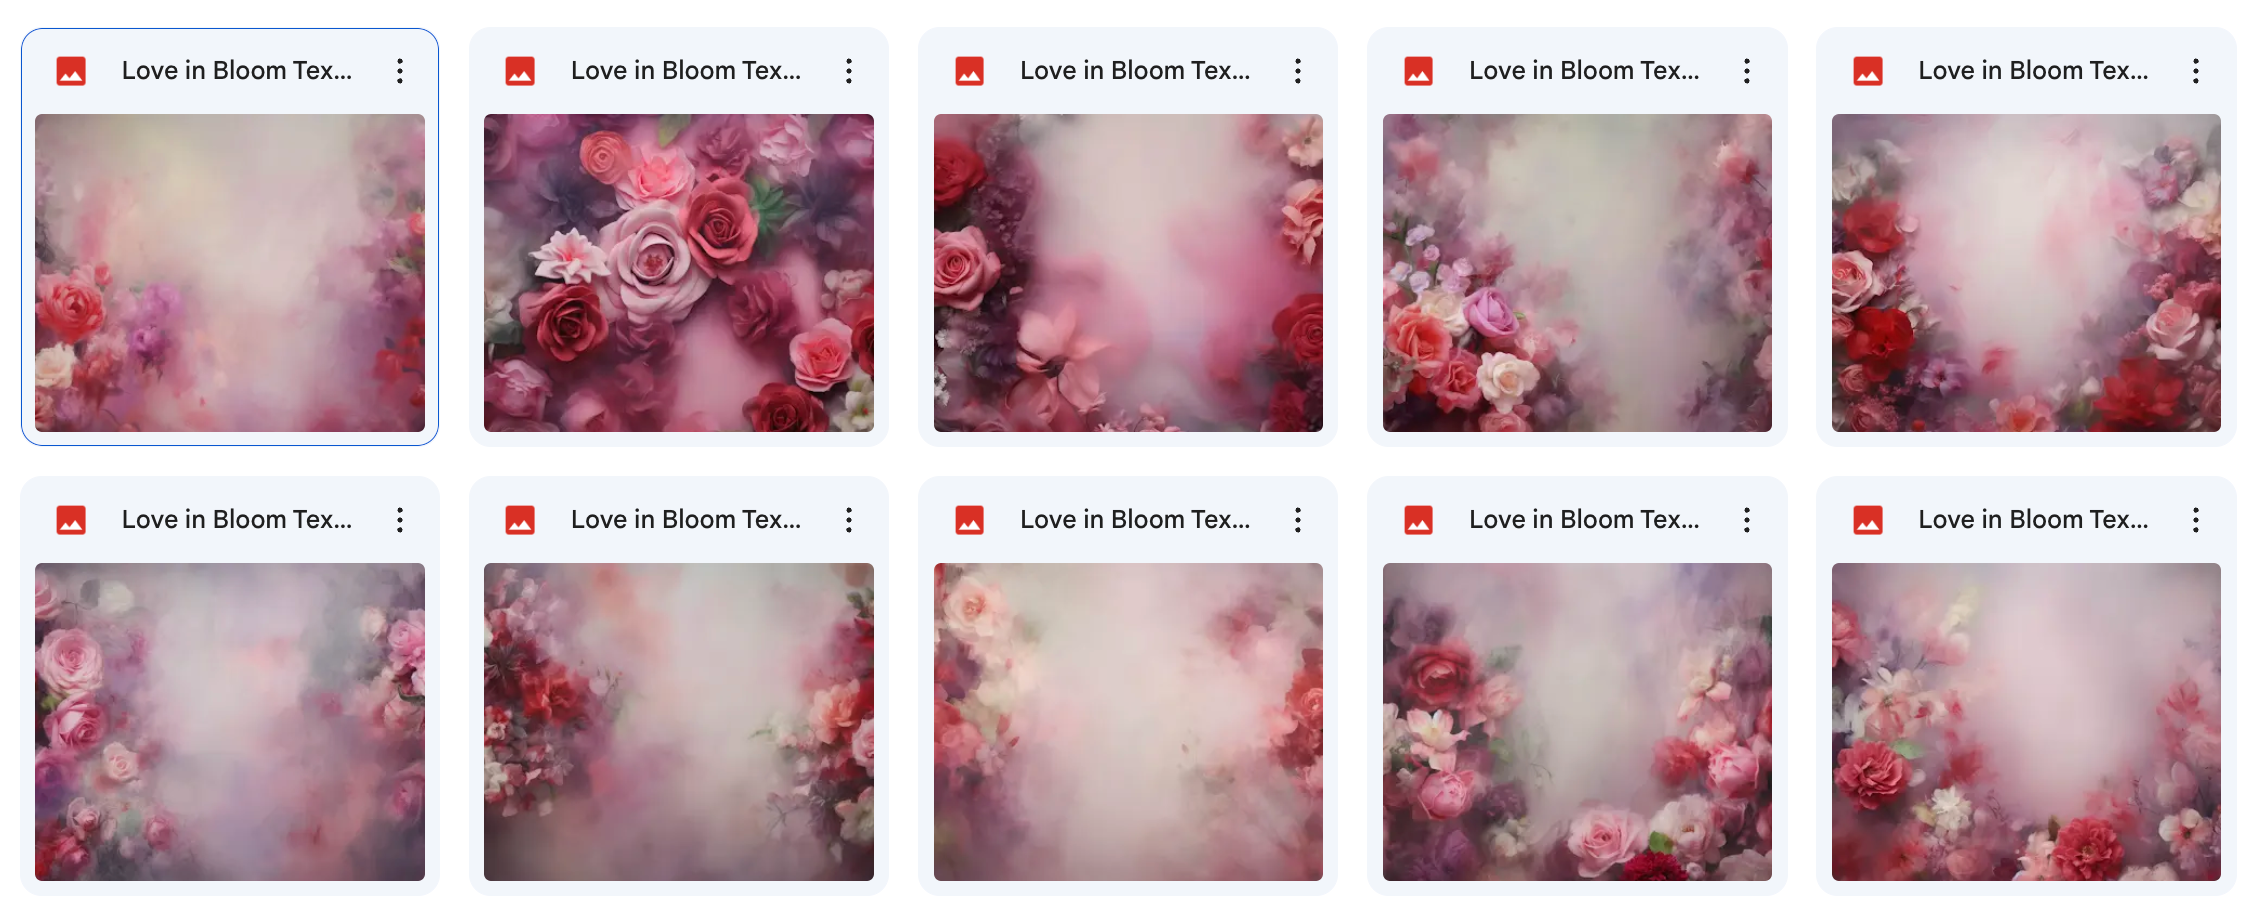 Love in Bloom Textures - Meg Bitton Productions